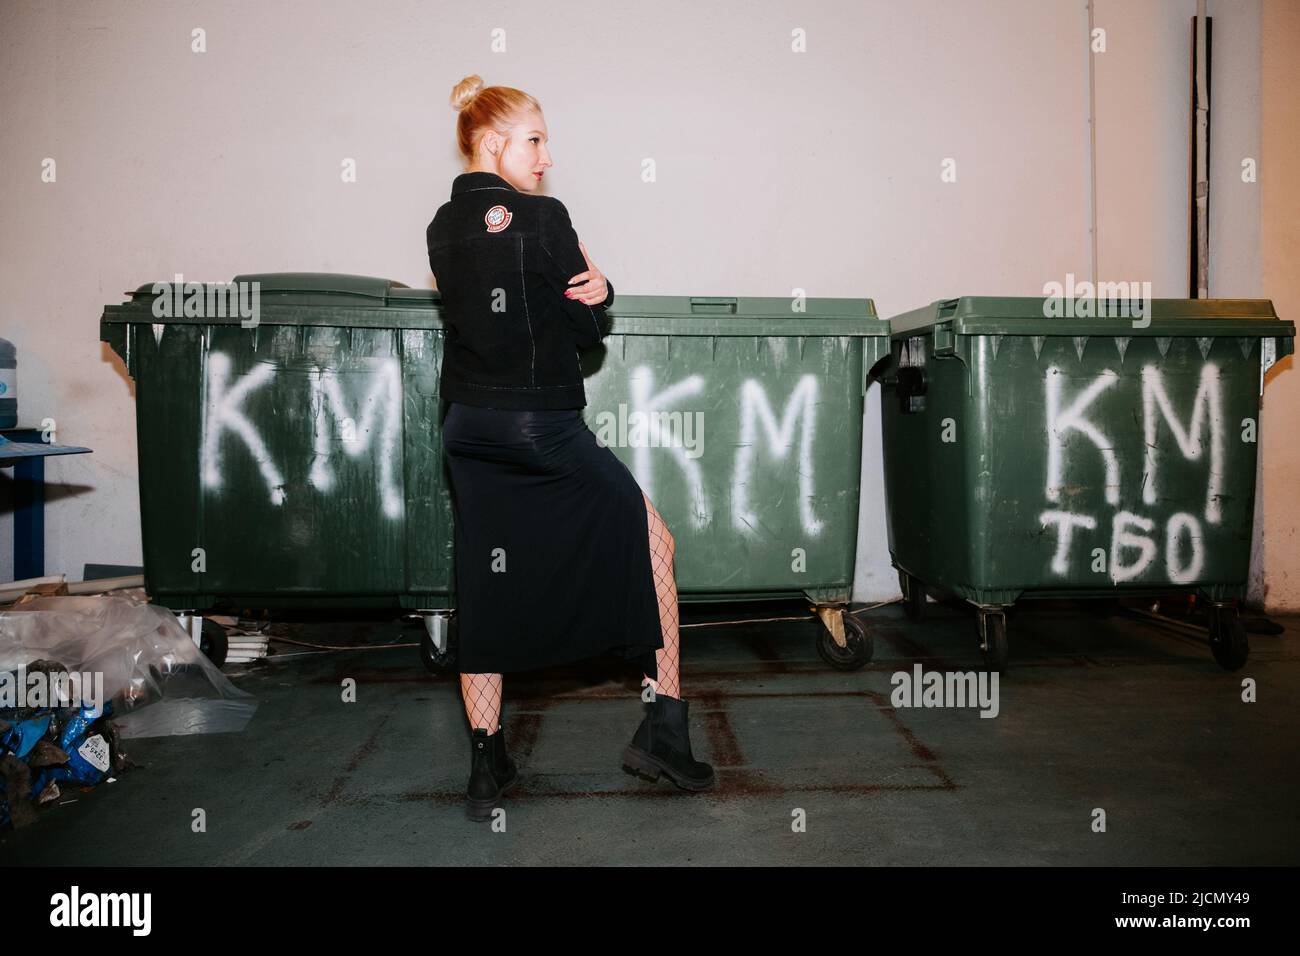 Pretty blonde girl with hair bun, wearing a long black coat and black boots, stands confidently near green waste containers with 'KM' painted on them Stock Photo